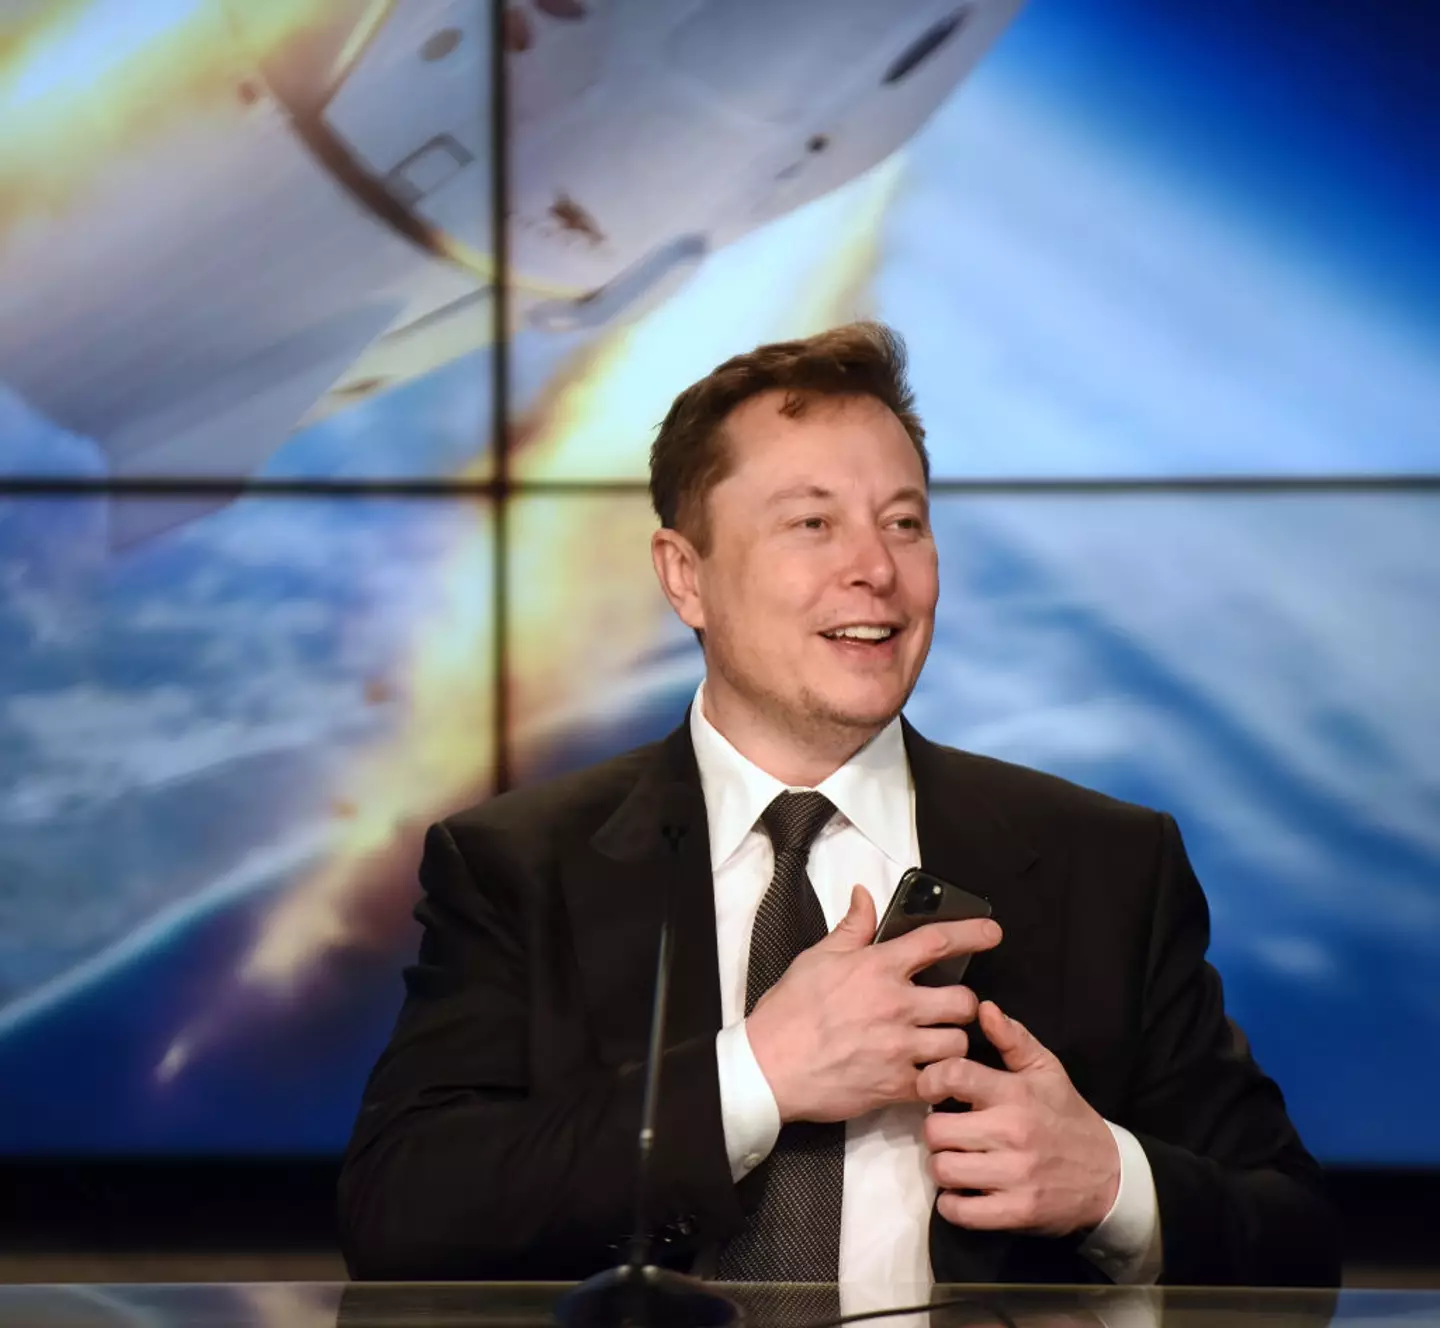 The SpaceX founder is determined to get humans on Mars.